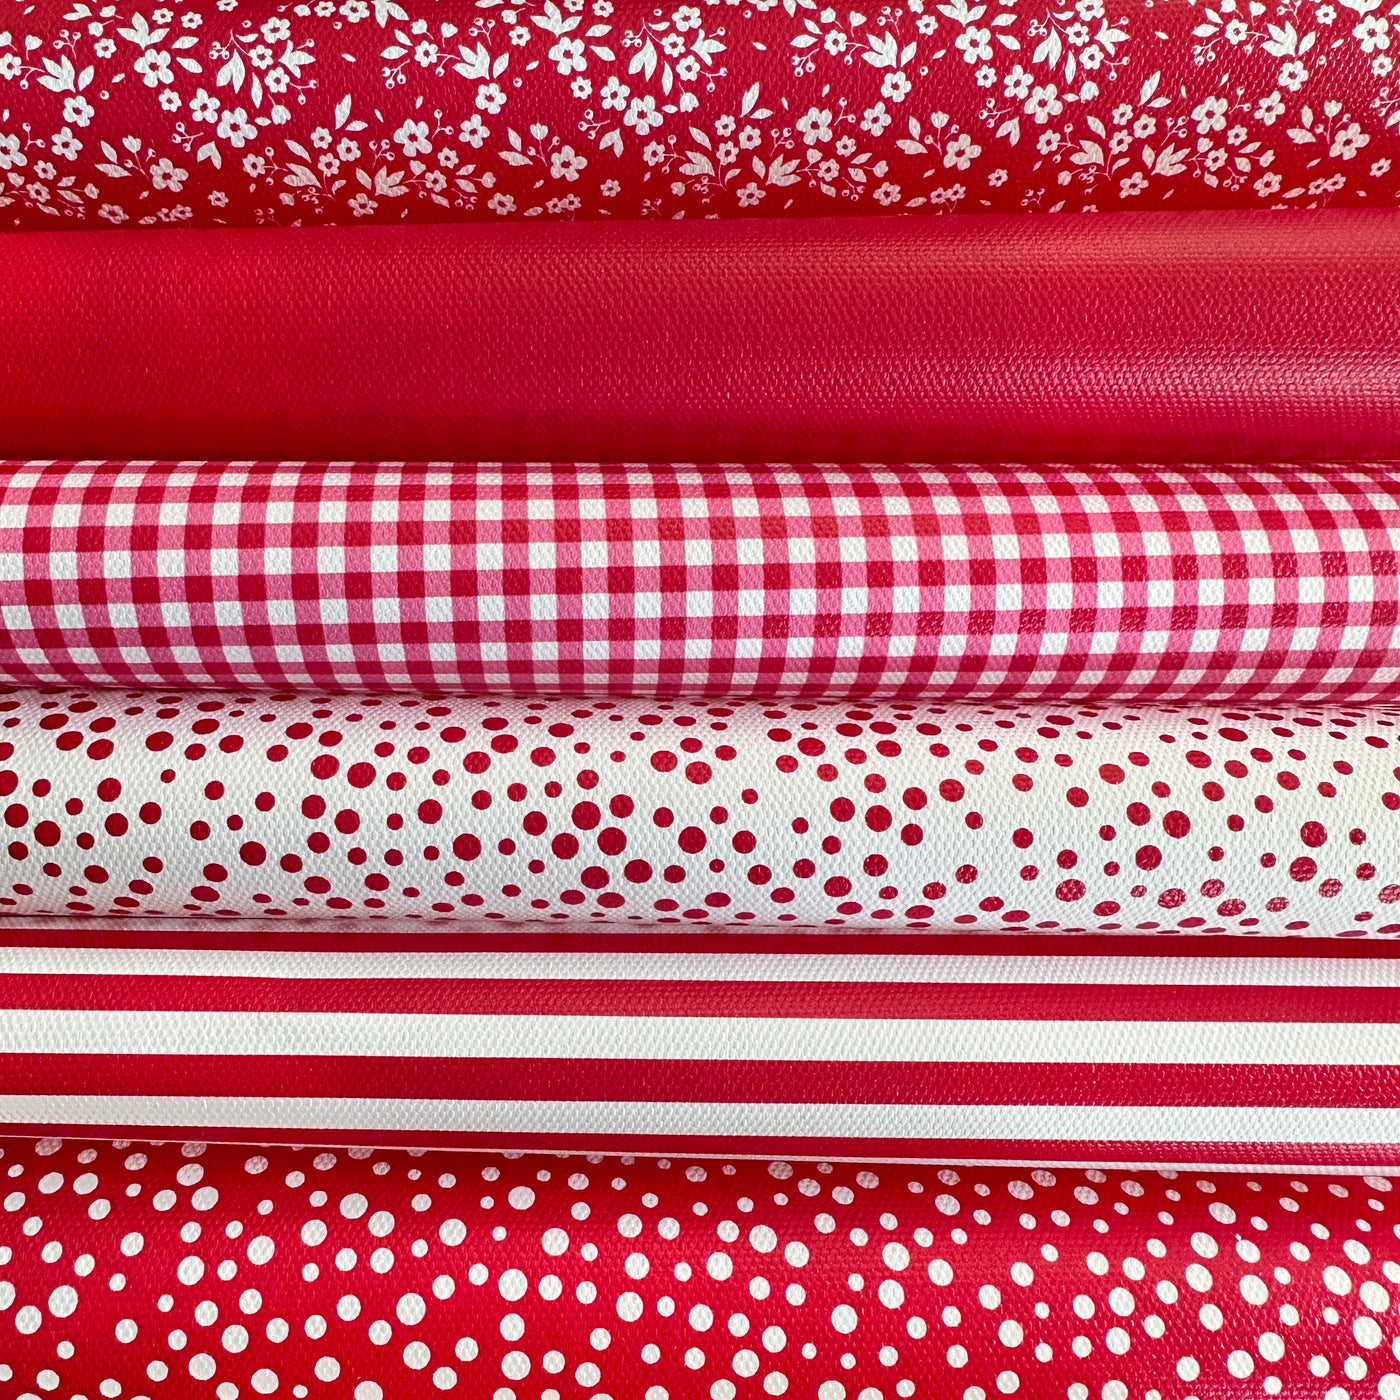 School red gingham solid stripe dots flower - faux Pu Leather vinyl - canvas - choose Fabric material Sheets